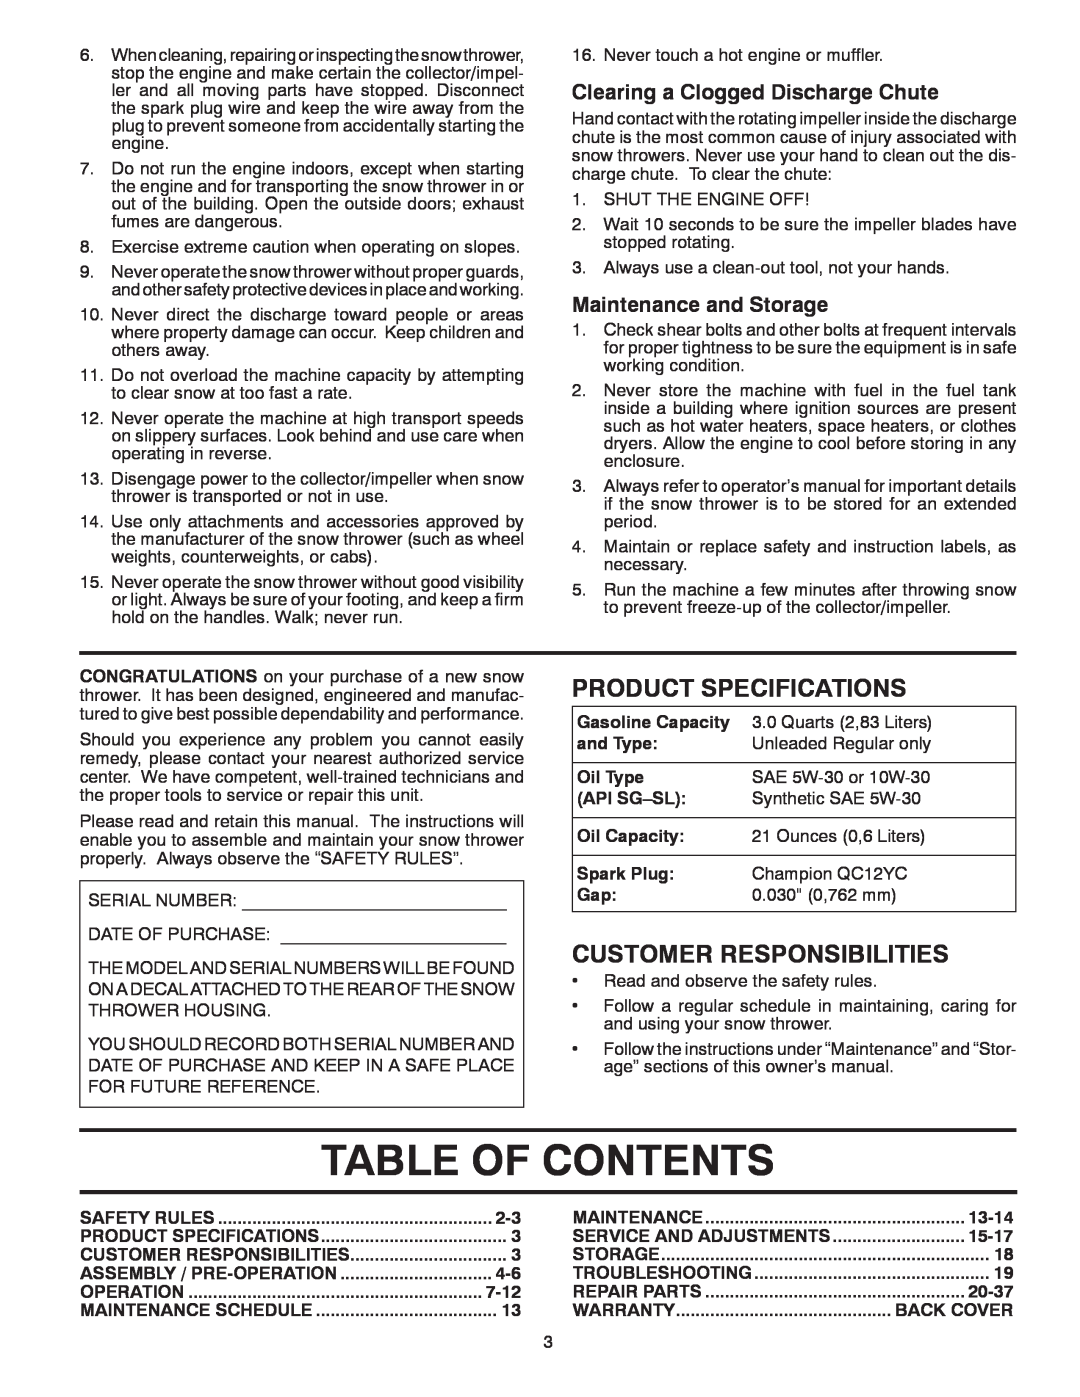 Poulan 96192003302 Table Of Contents, Product Specifications, Customer Responsibilities, Maintenance and Storage, and Type 